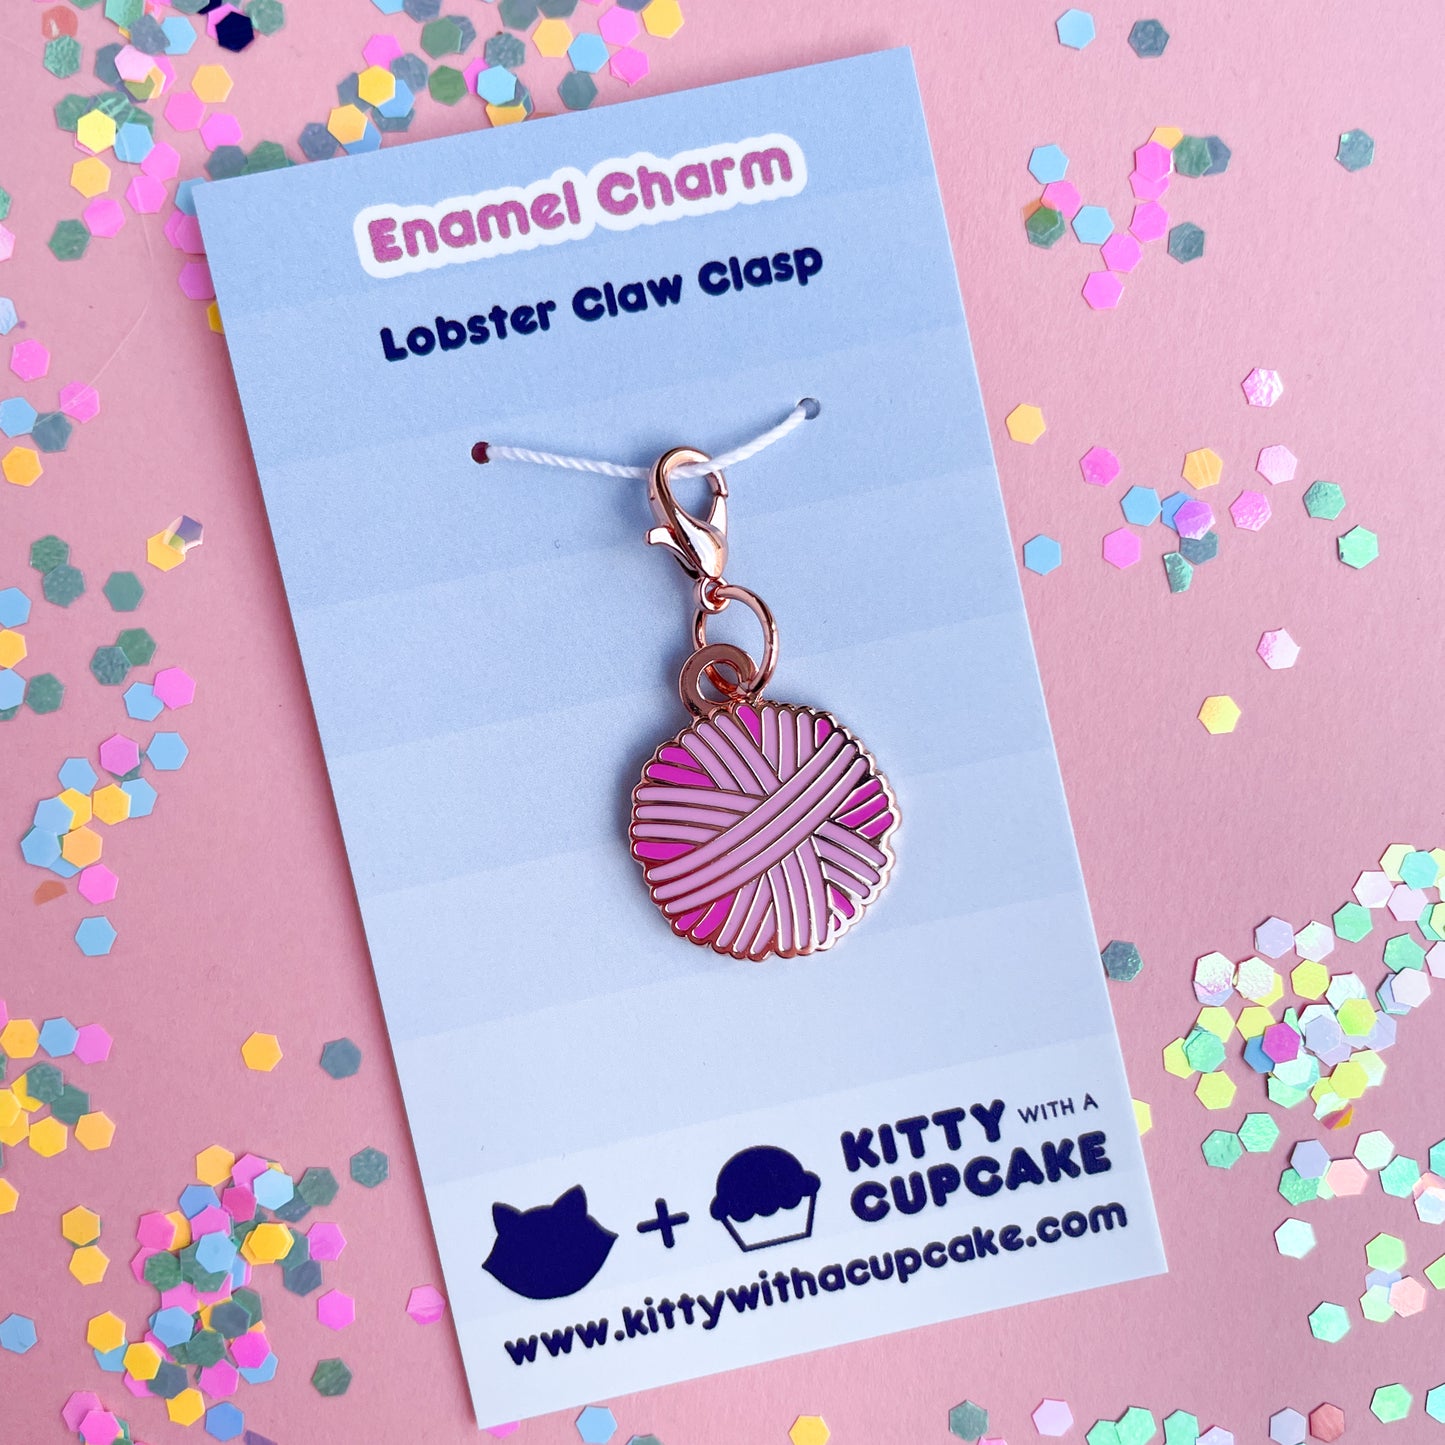 A pink yarn ball shaped charm on a blue background. 